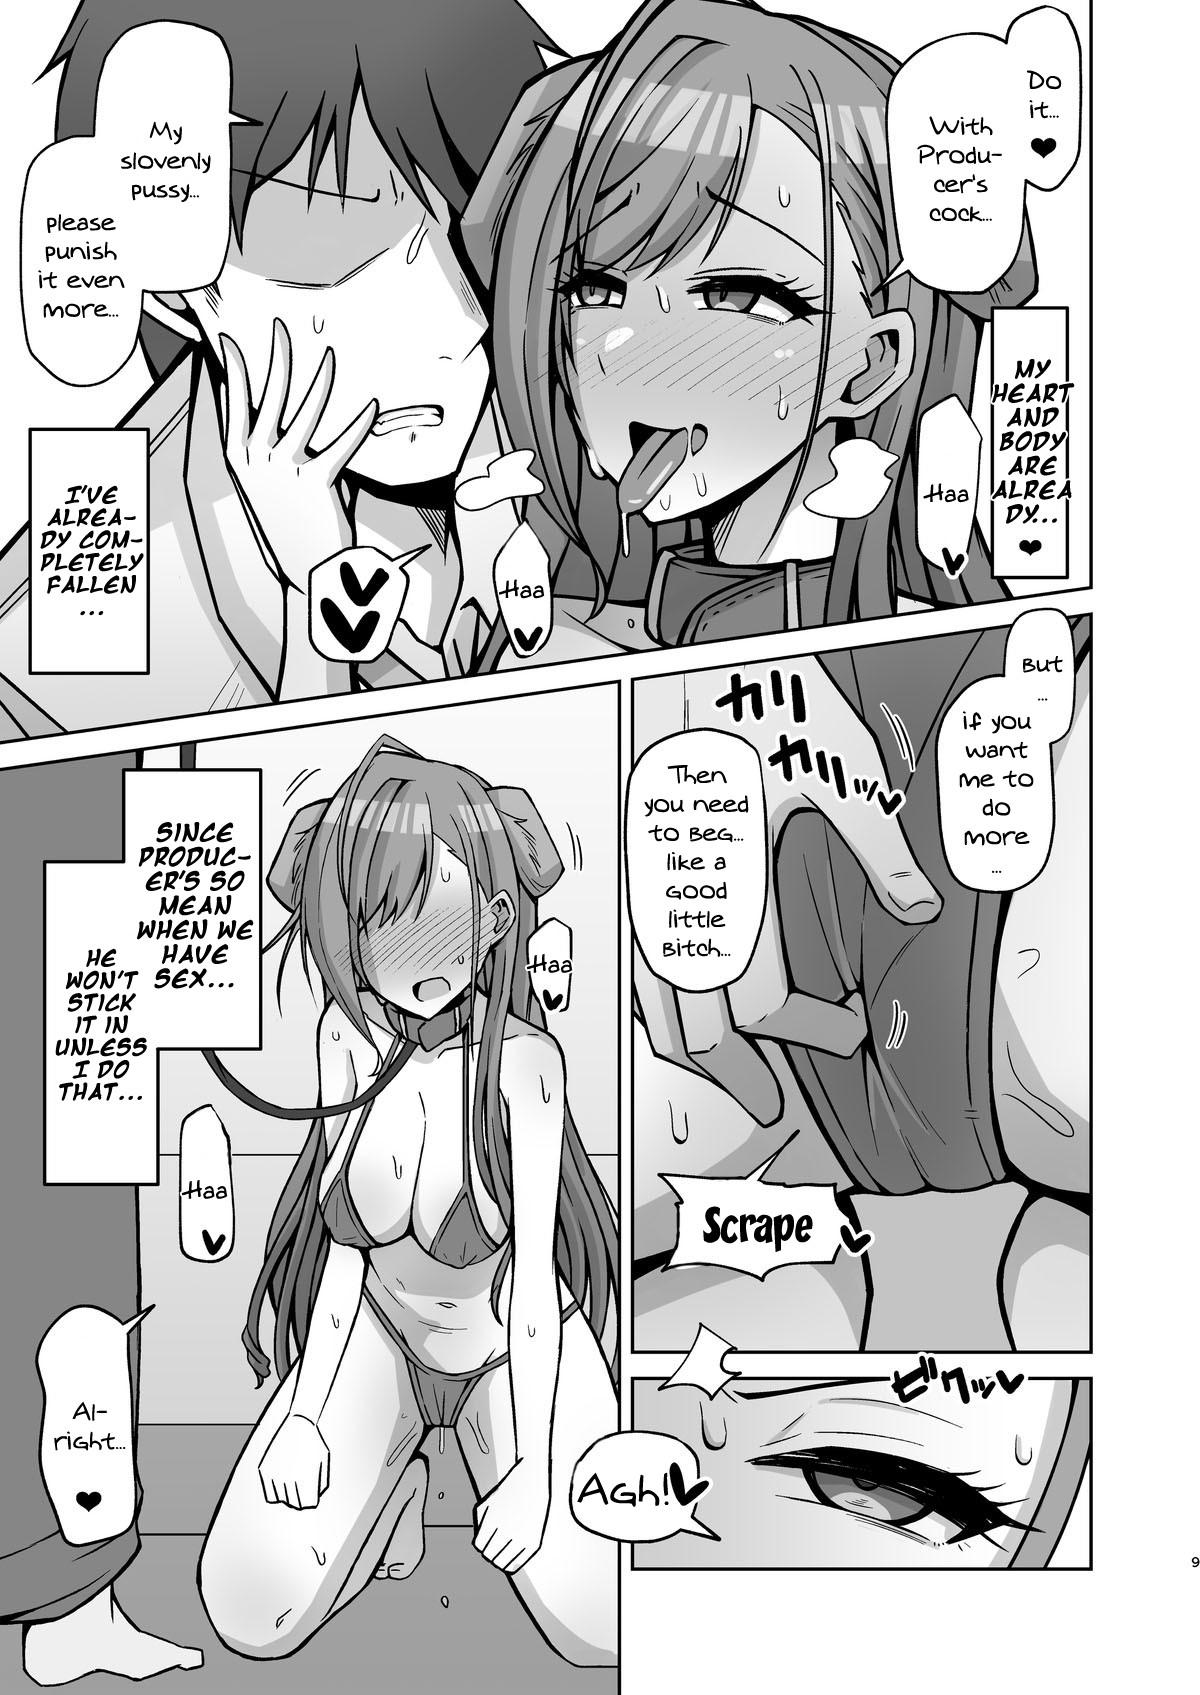 Harcore InuCos H tte Sugoi no yo! | Fucking While Dressed Like a Dog Feels Amazing! - The idolmaster Prostitute - Page 8